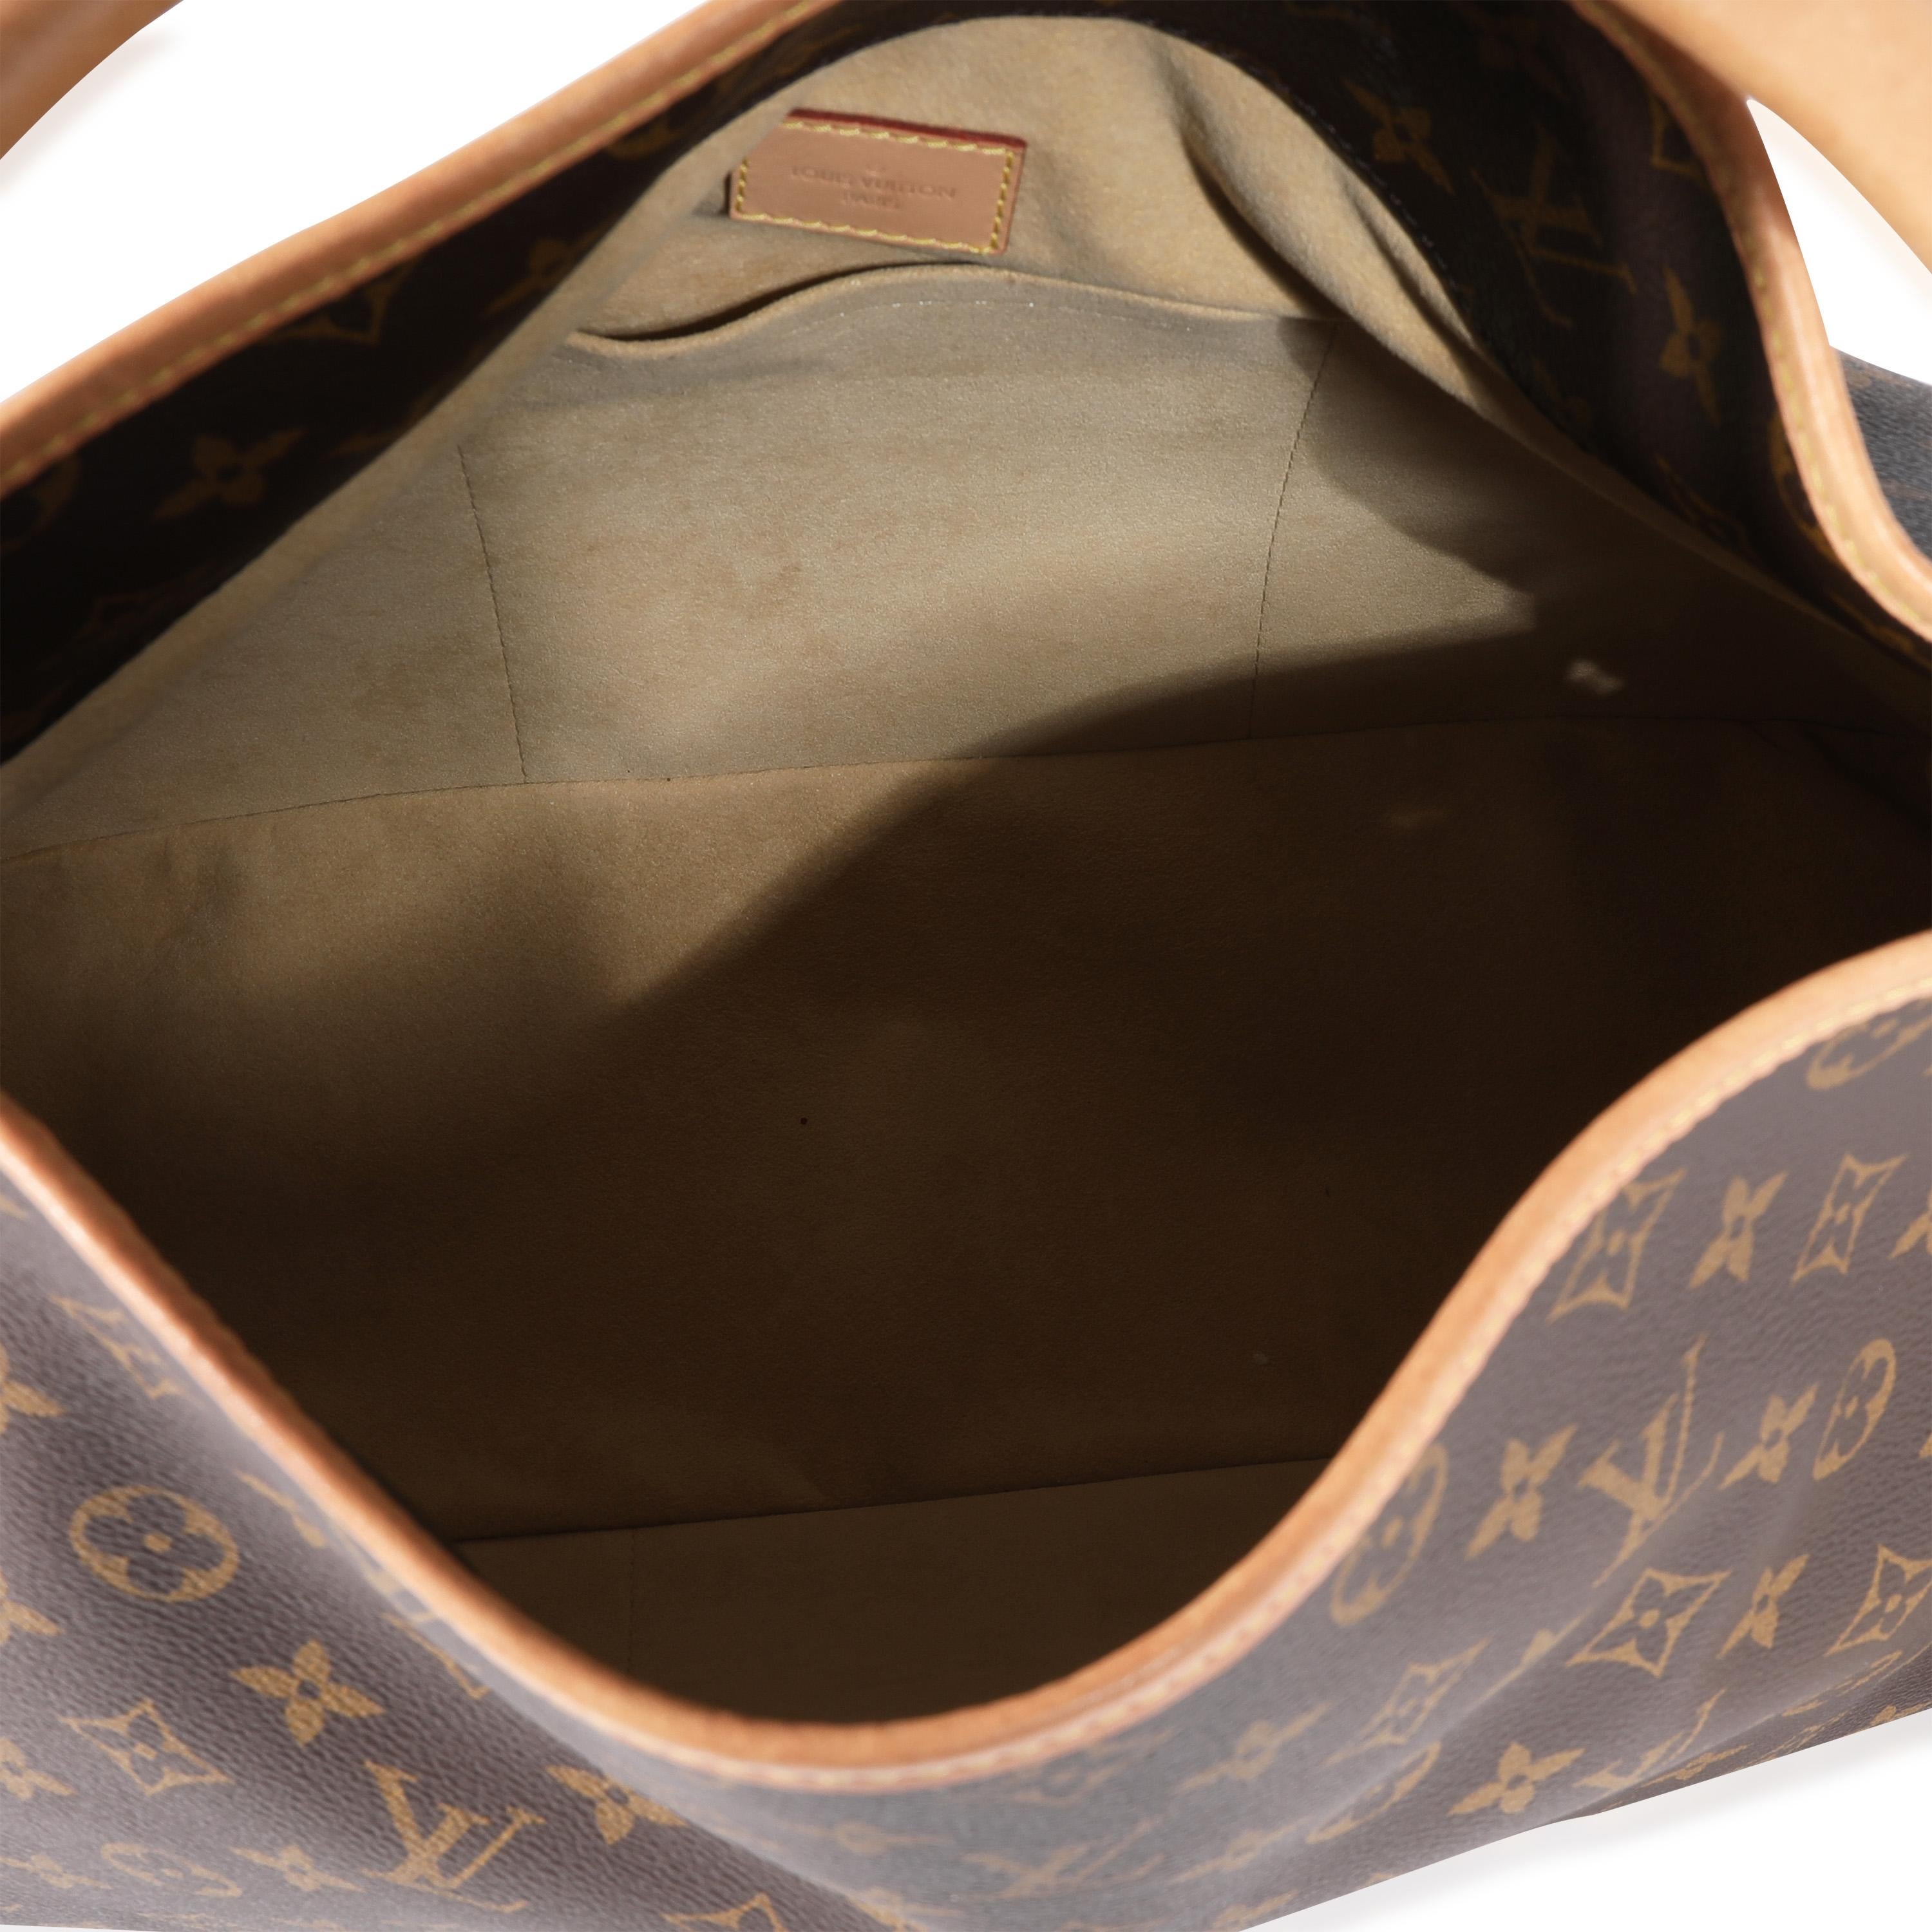 Listing Title: Louis Vuitton Monogram Canvas Artsy MM
SKU: 122270
MSRP: 2500.00
Condition: Pre-owned 
Handbag Condition: Very Good
Condition Comments: Very Good Condition. Light patina throughout leather. Plastic at some hardware. Light scuffing at